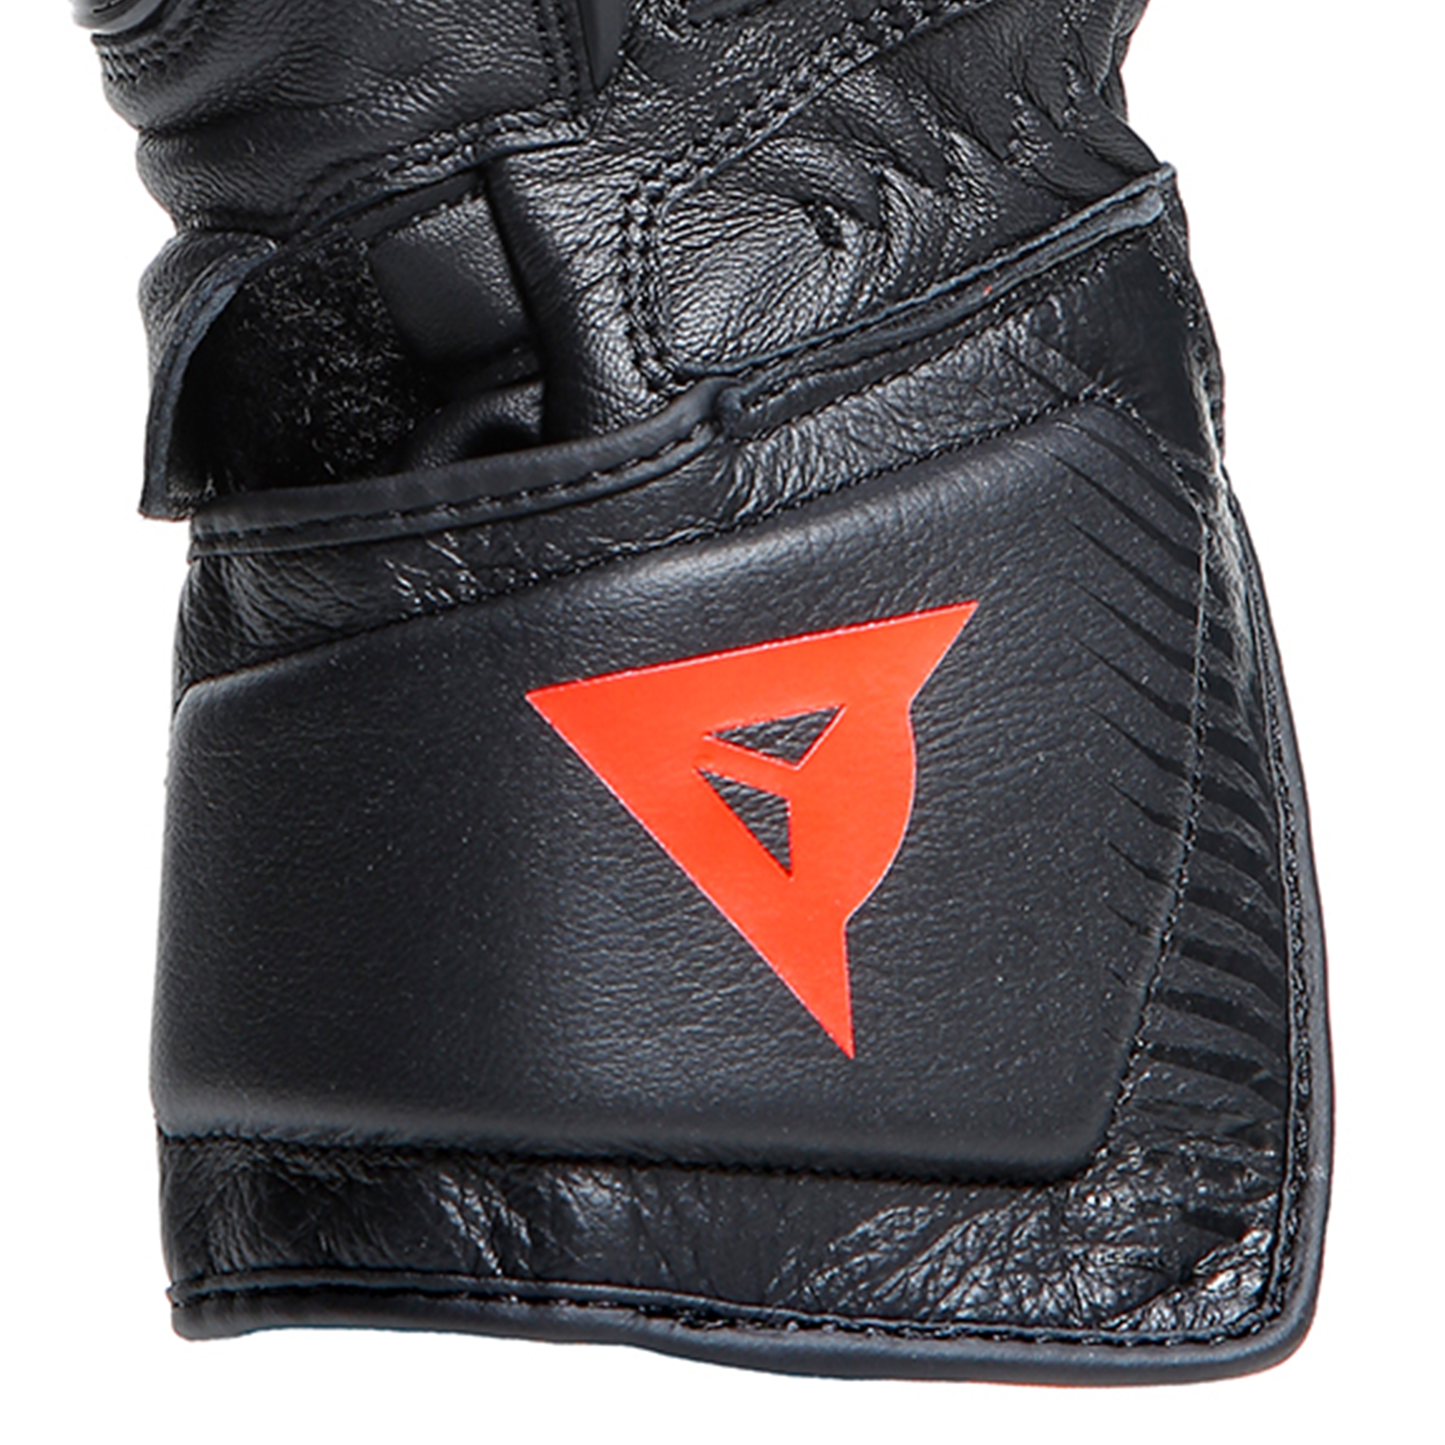 Dainese Carbon 4 Long Leather Gloves - Black